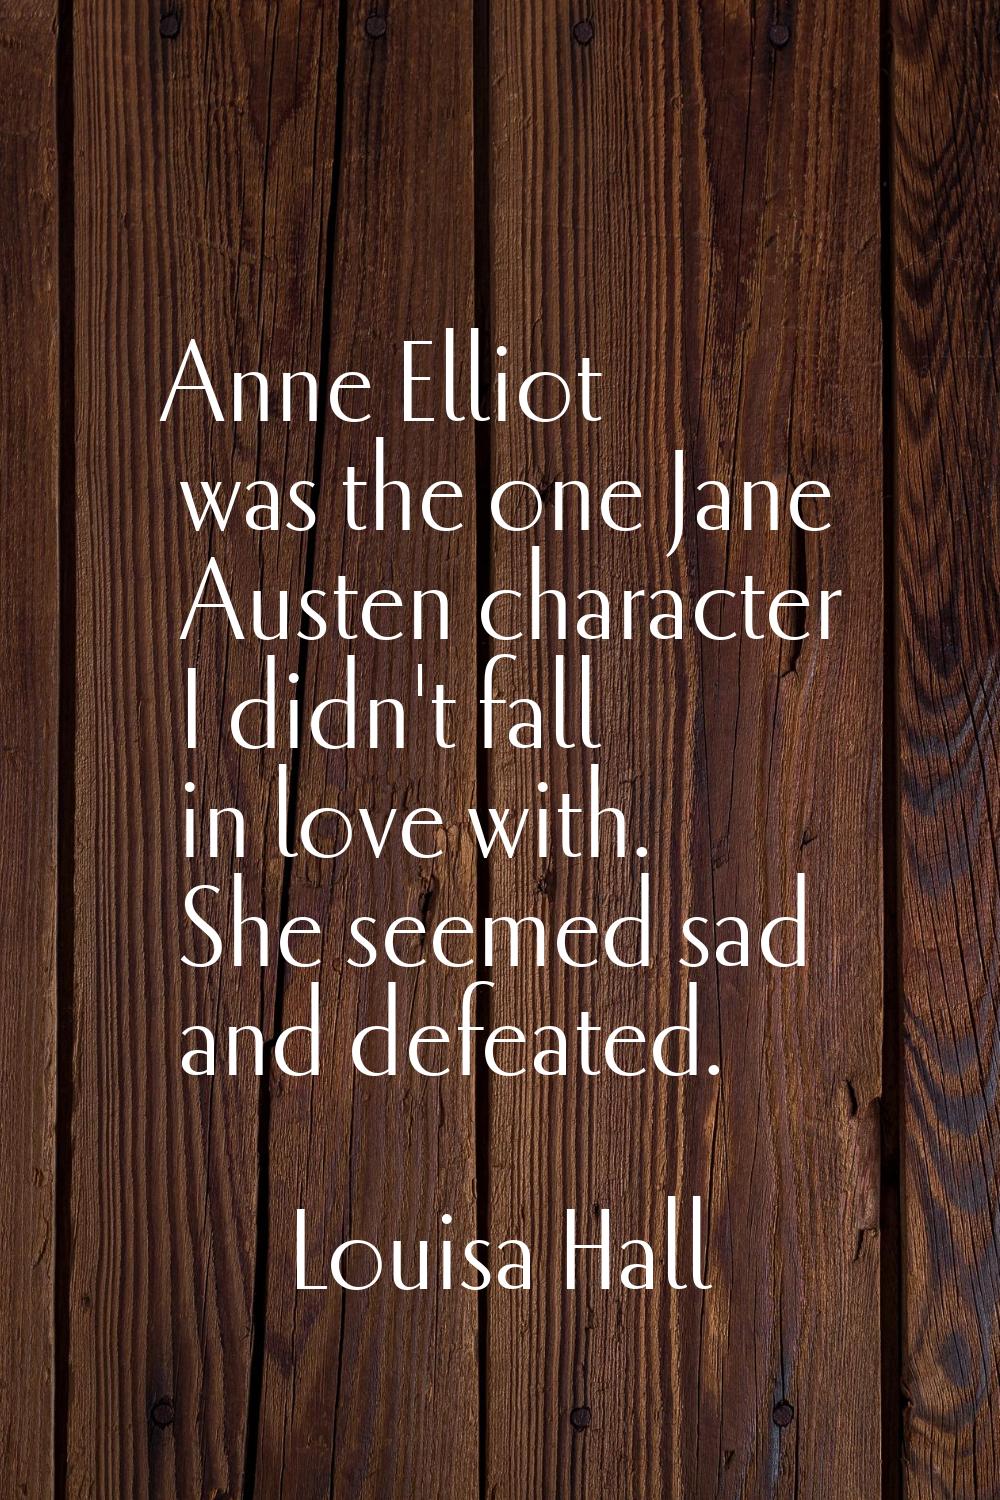 Anne Elliot was the one Jane Austen character I didn't fall in love with. She seemed sad and defeat